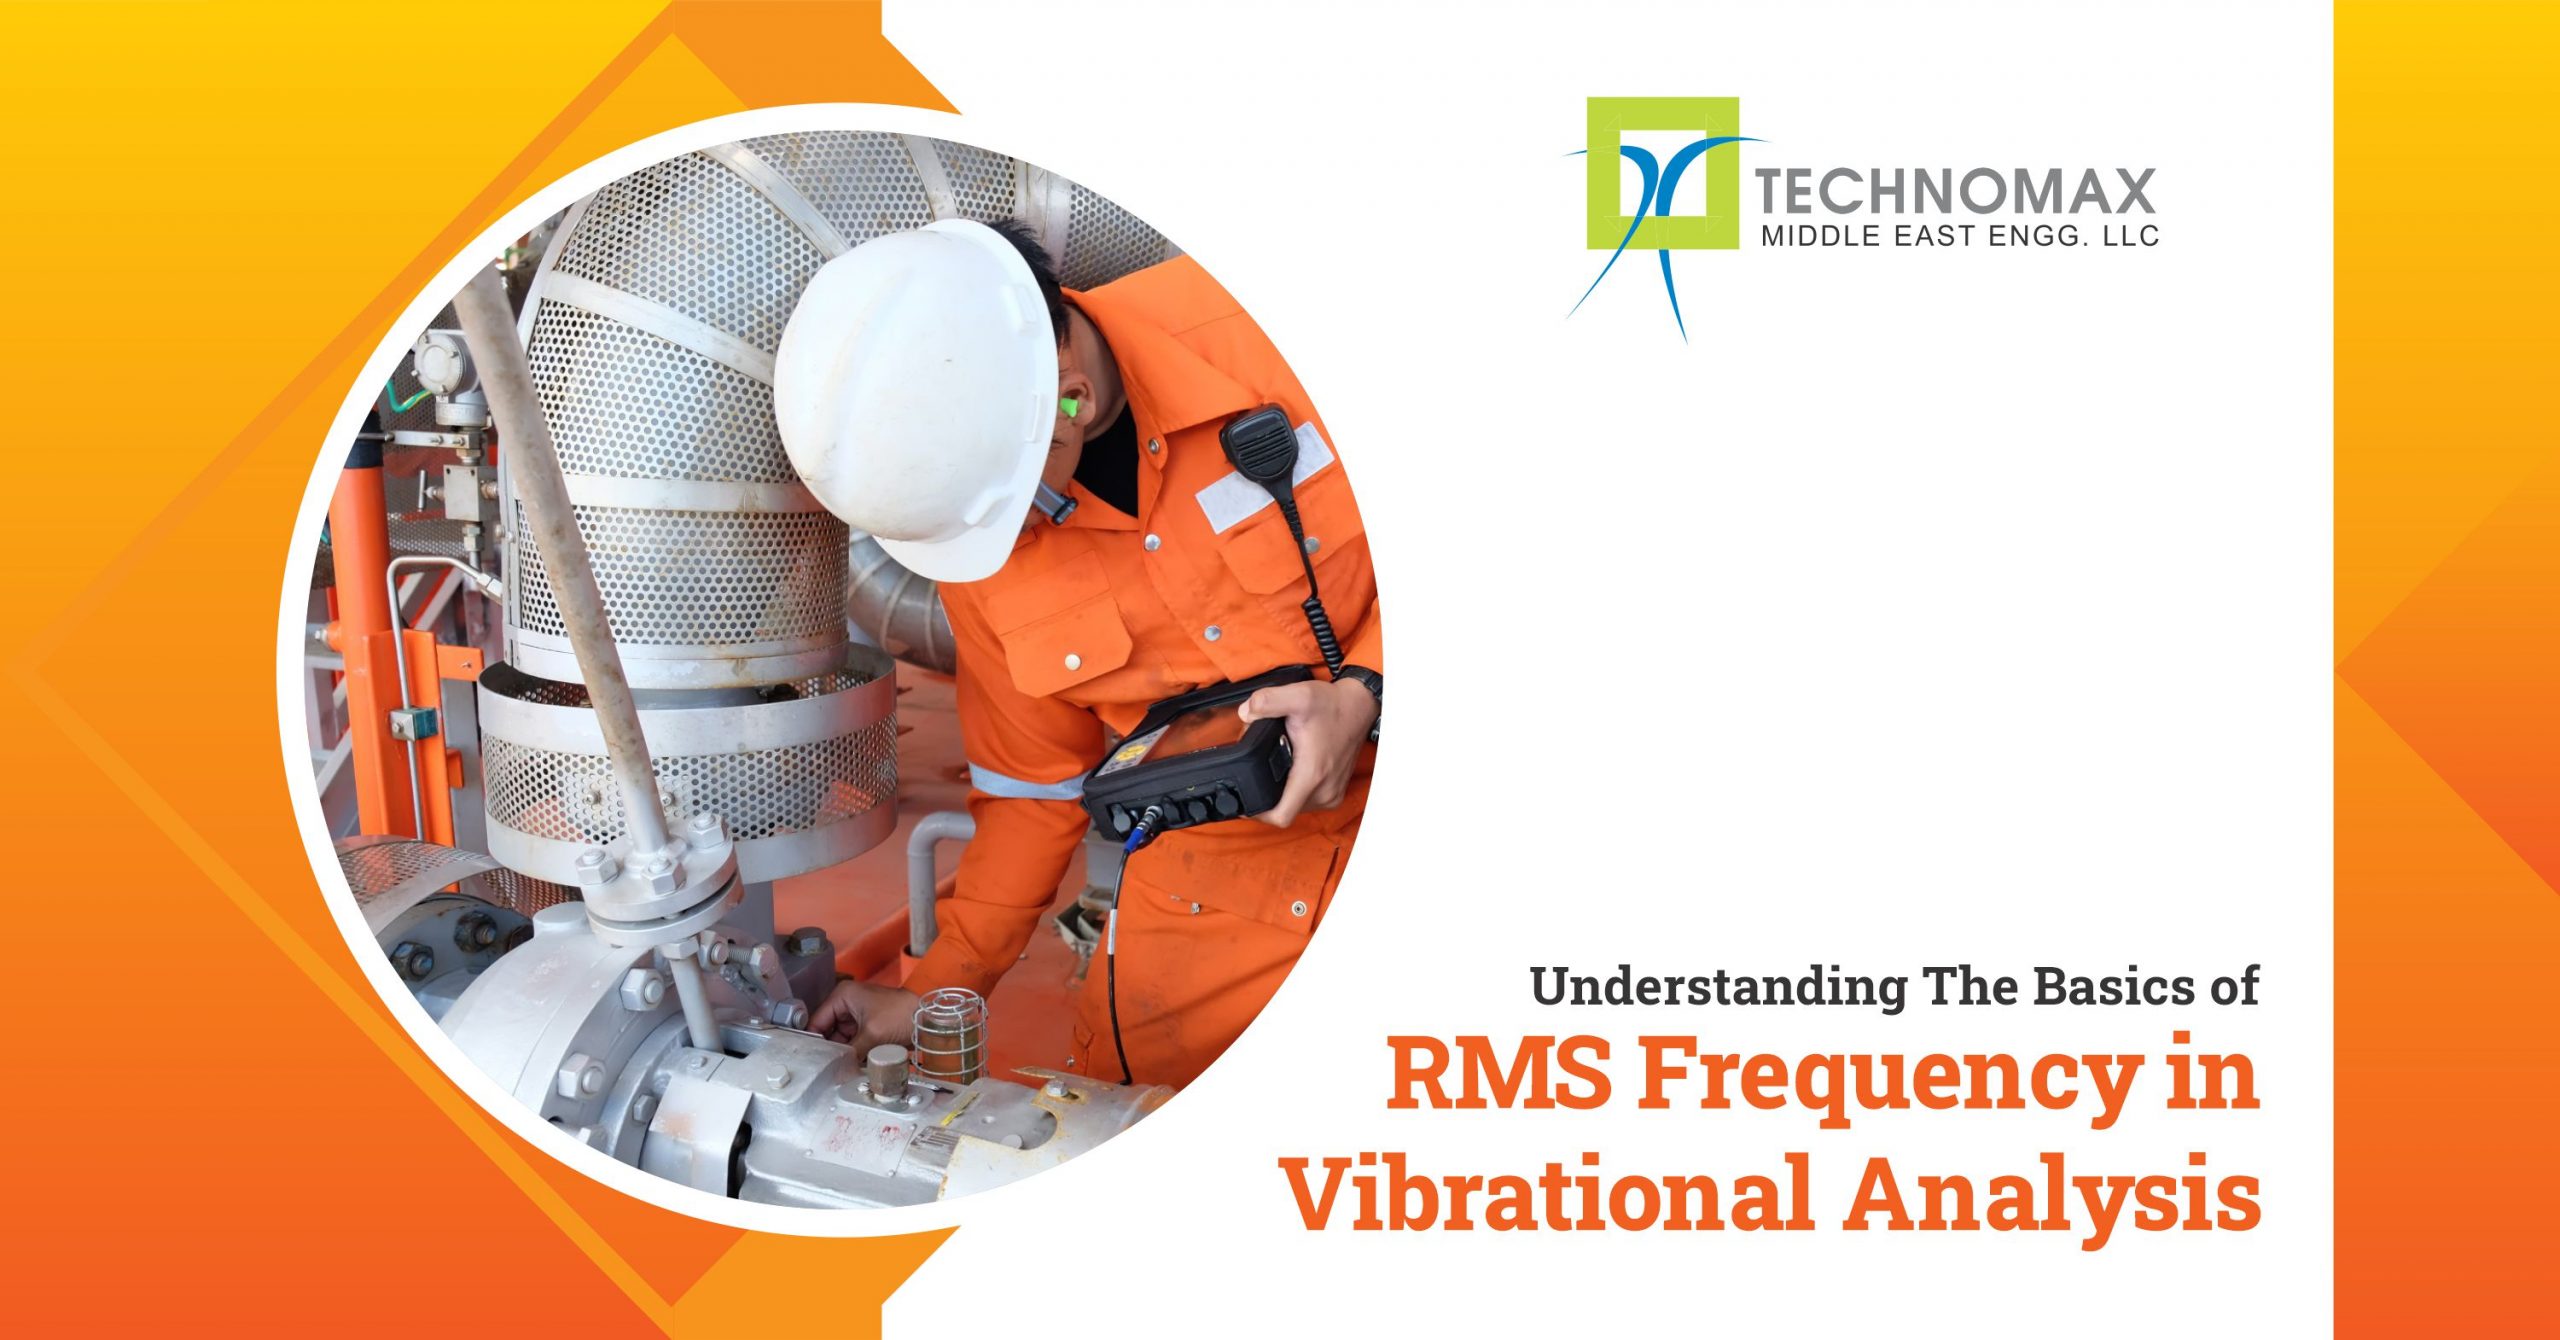 Understanding the RMS Frequency in Vibrational Analysis